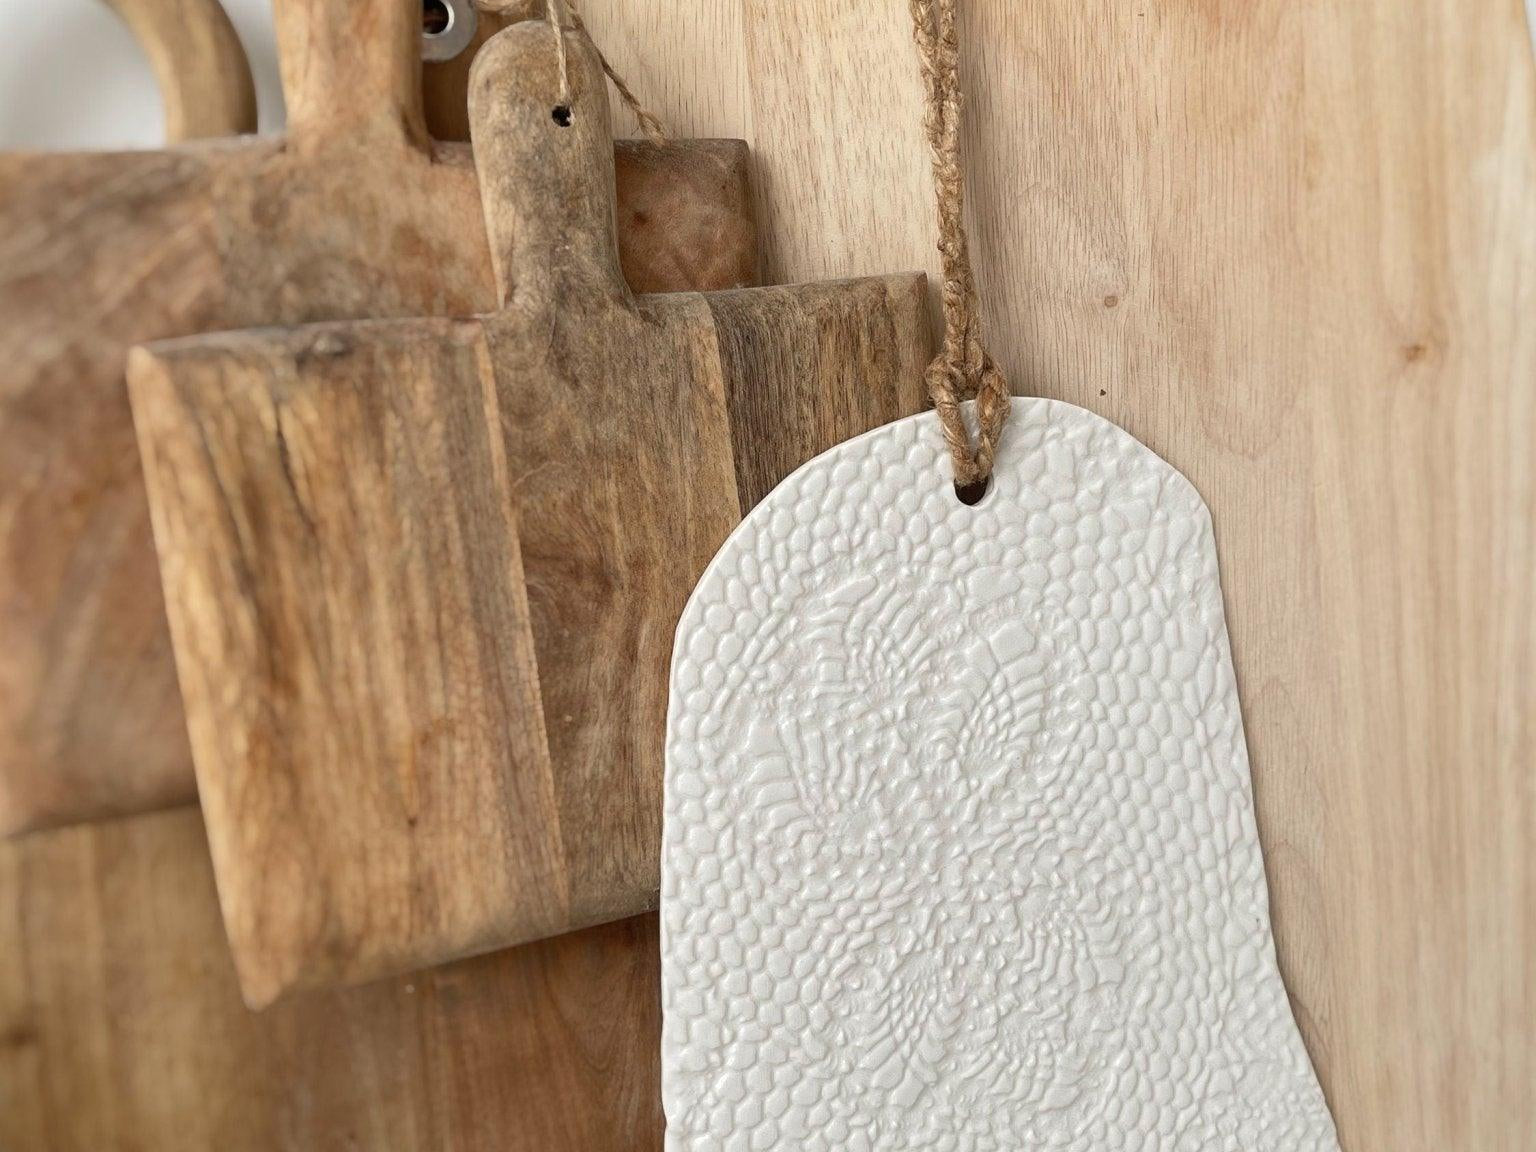 Lace Textured Cheeseboard MuddyHeart